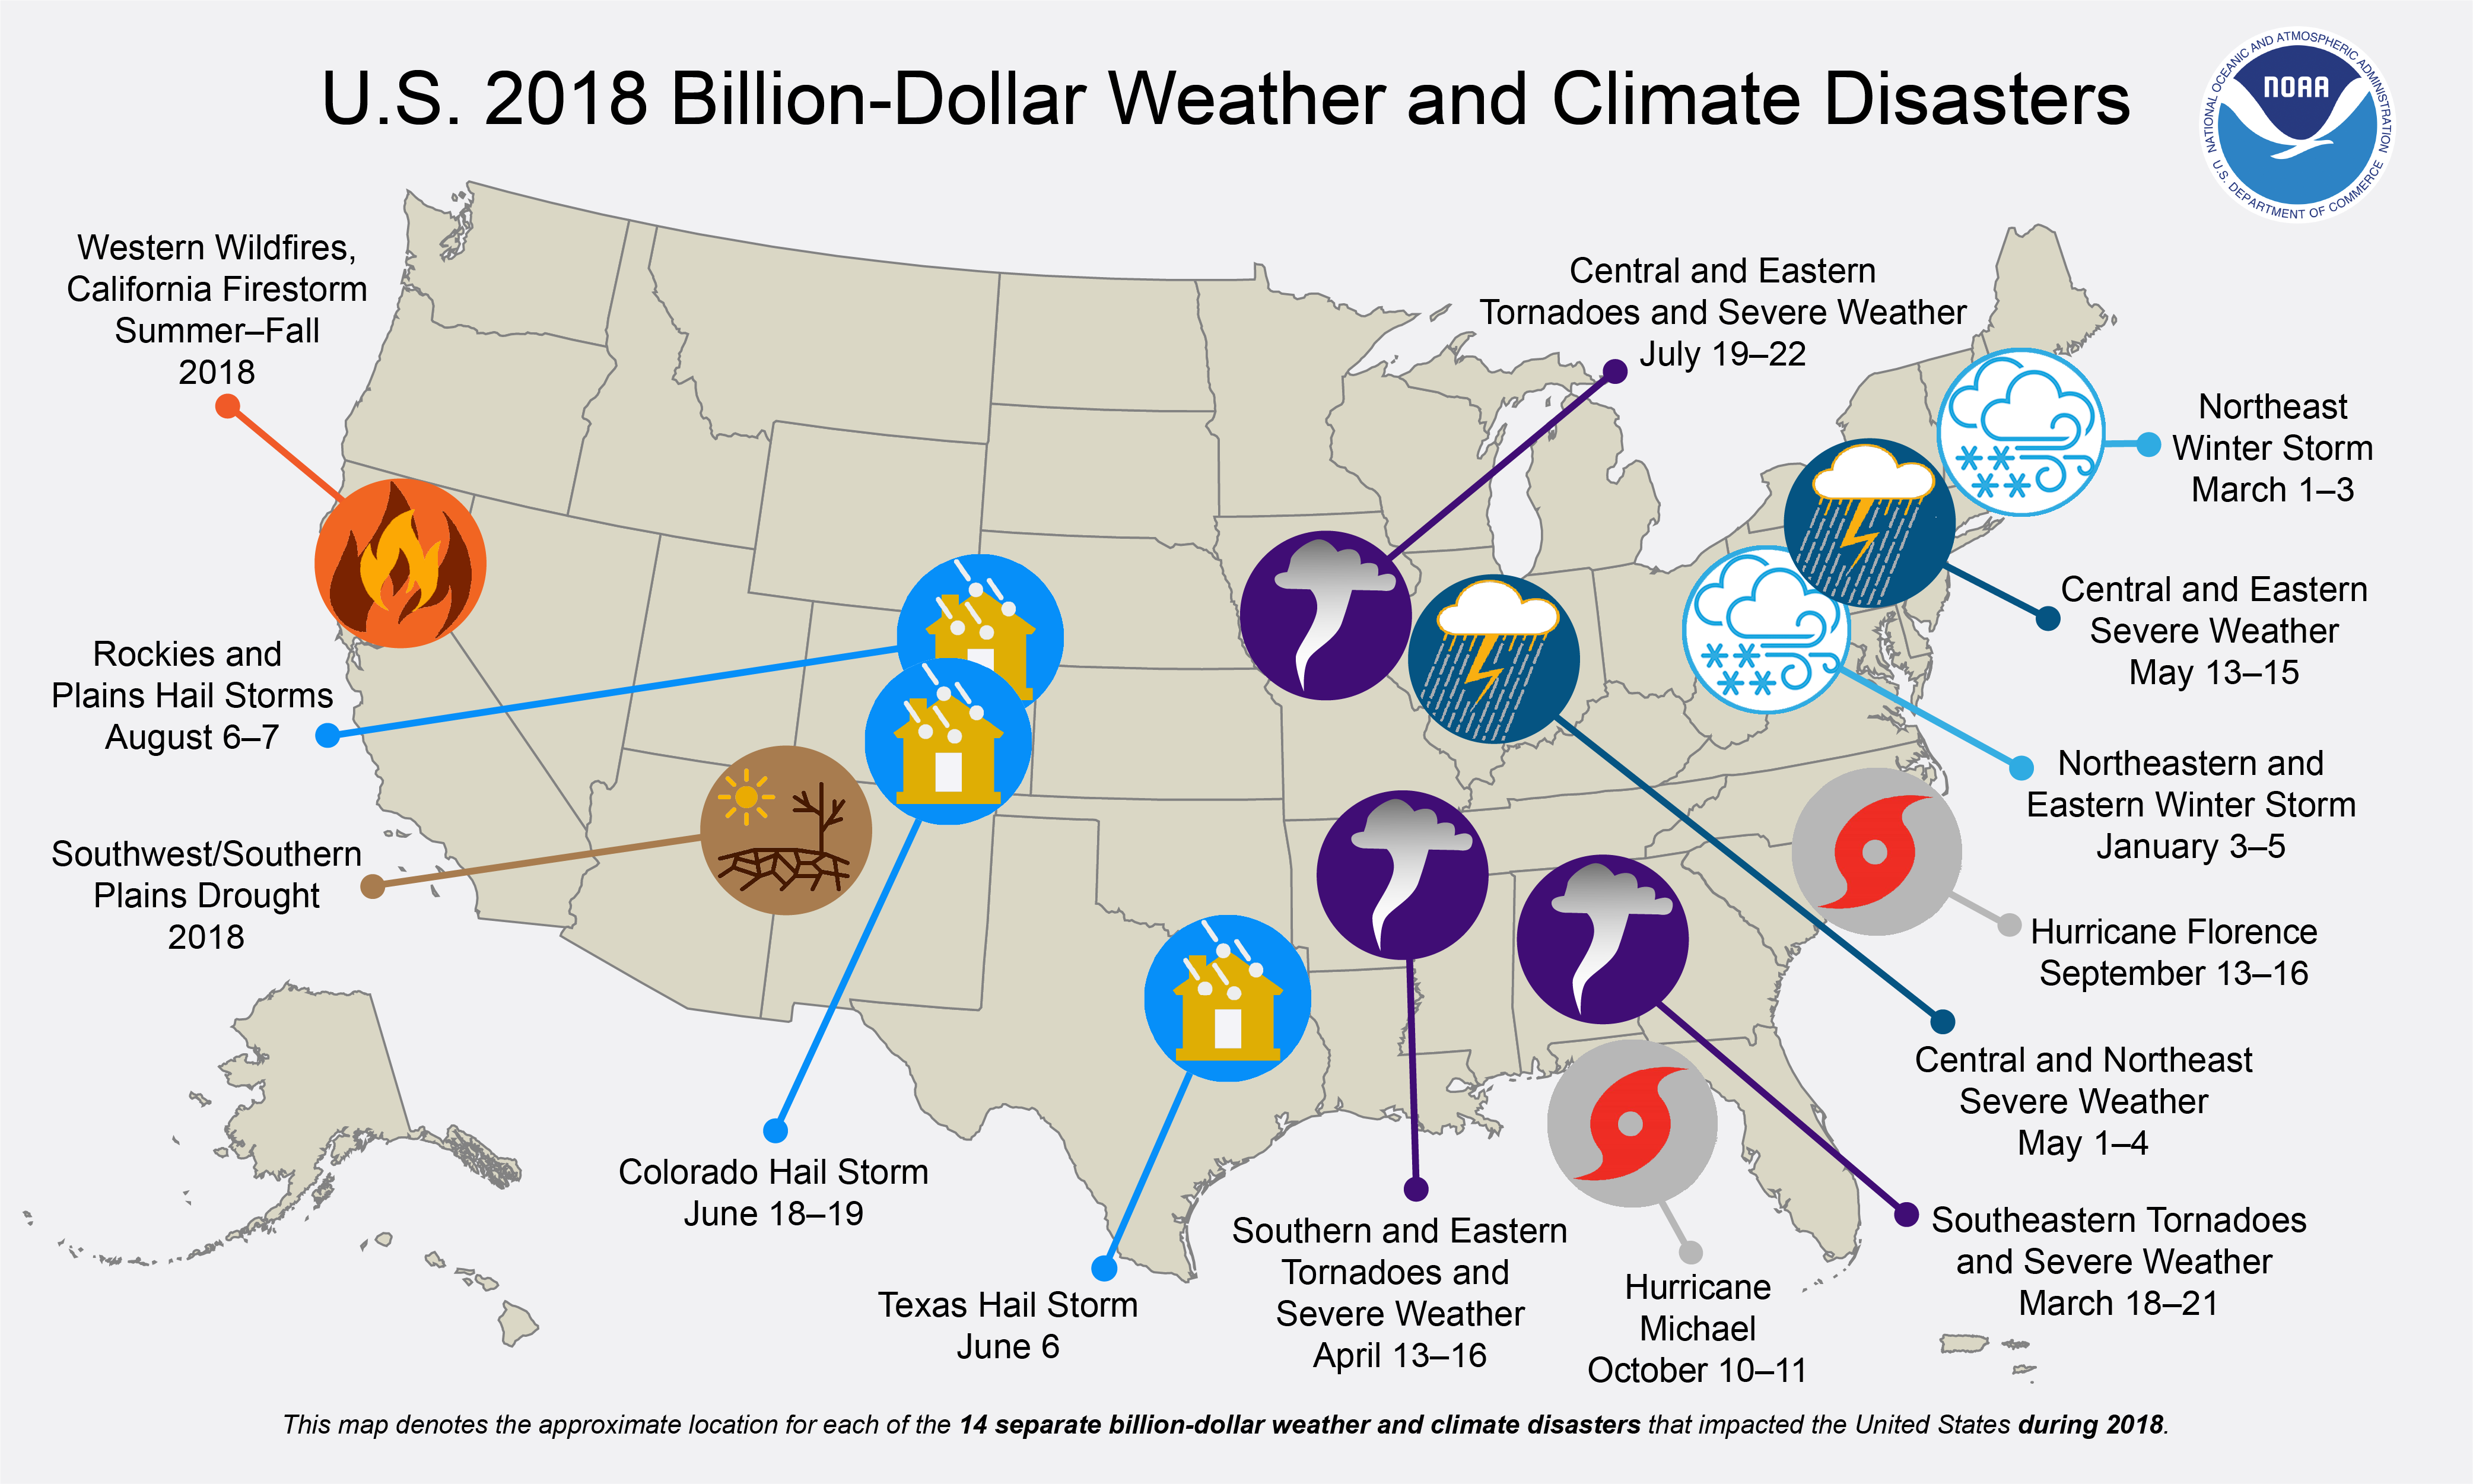 U.S. 2017 Billion-Dollar Weather and Climate Disasters